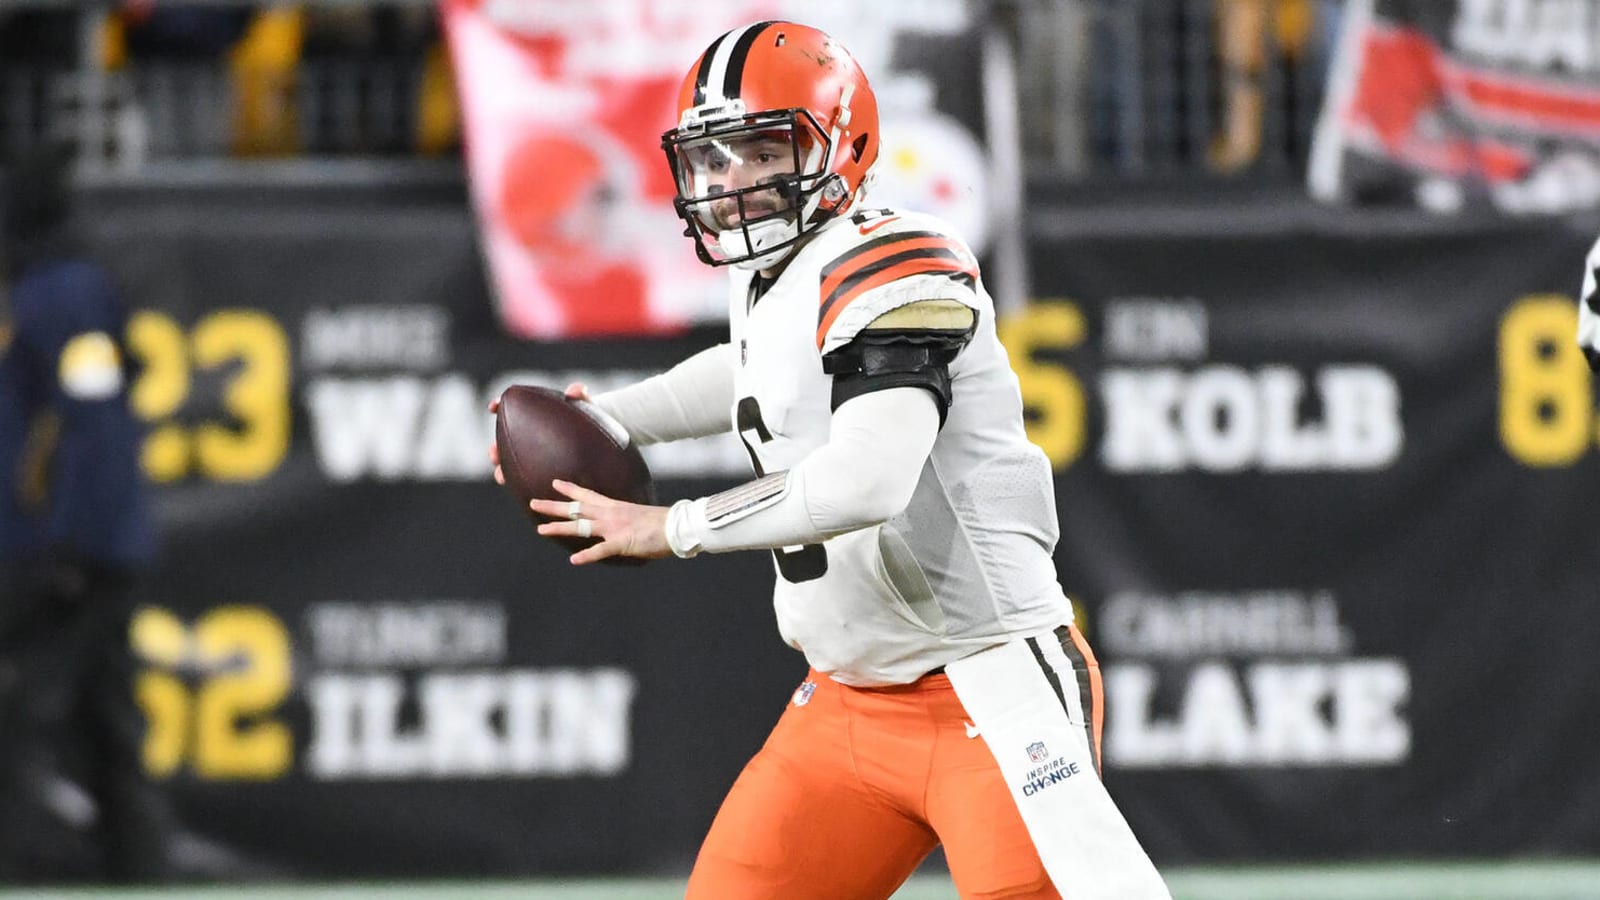 Steelers 'will pounce' to sign Mayfield if he hits free agency?